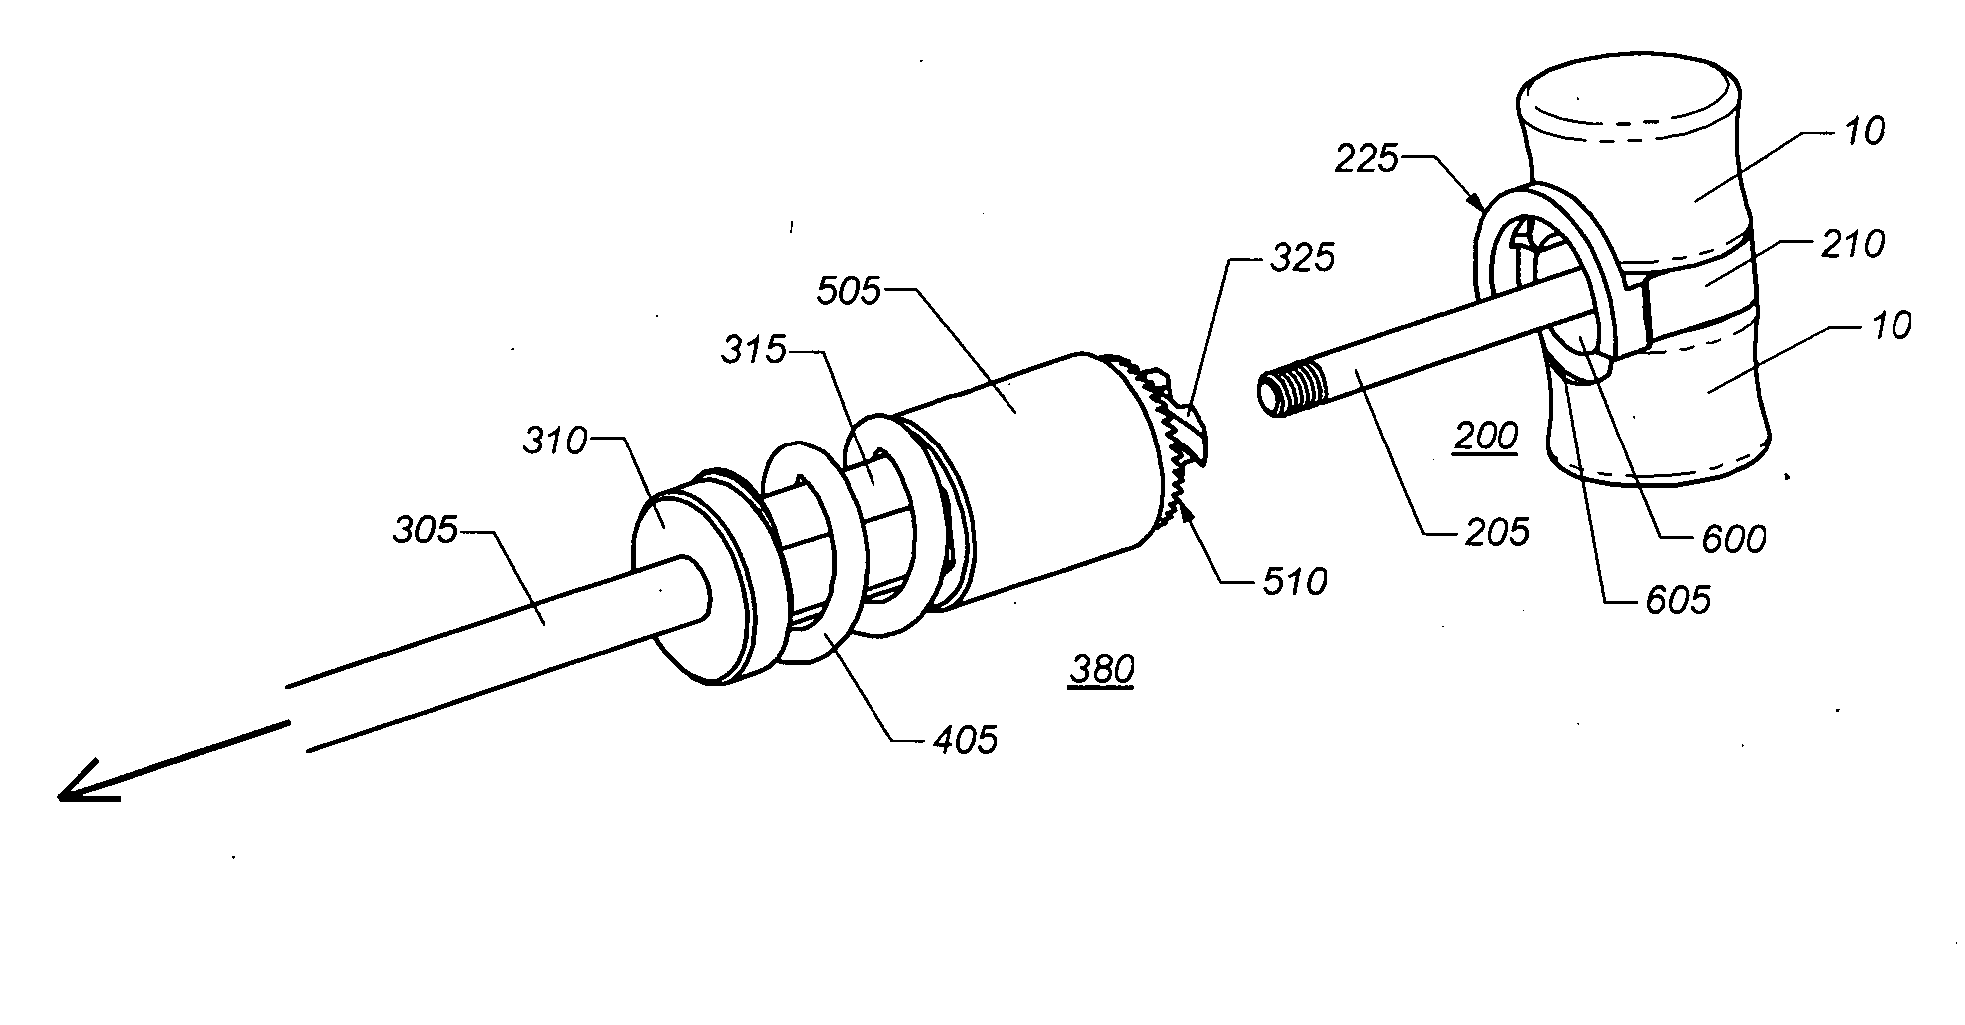 Apparatus and method of shaping an intervertebral space